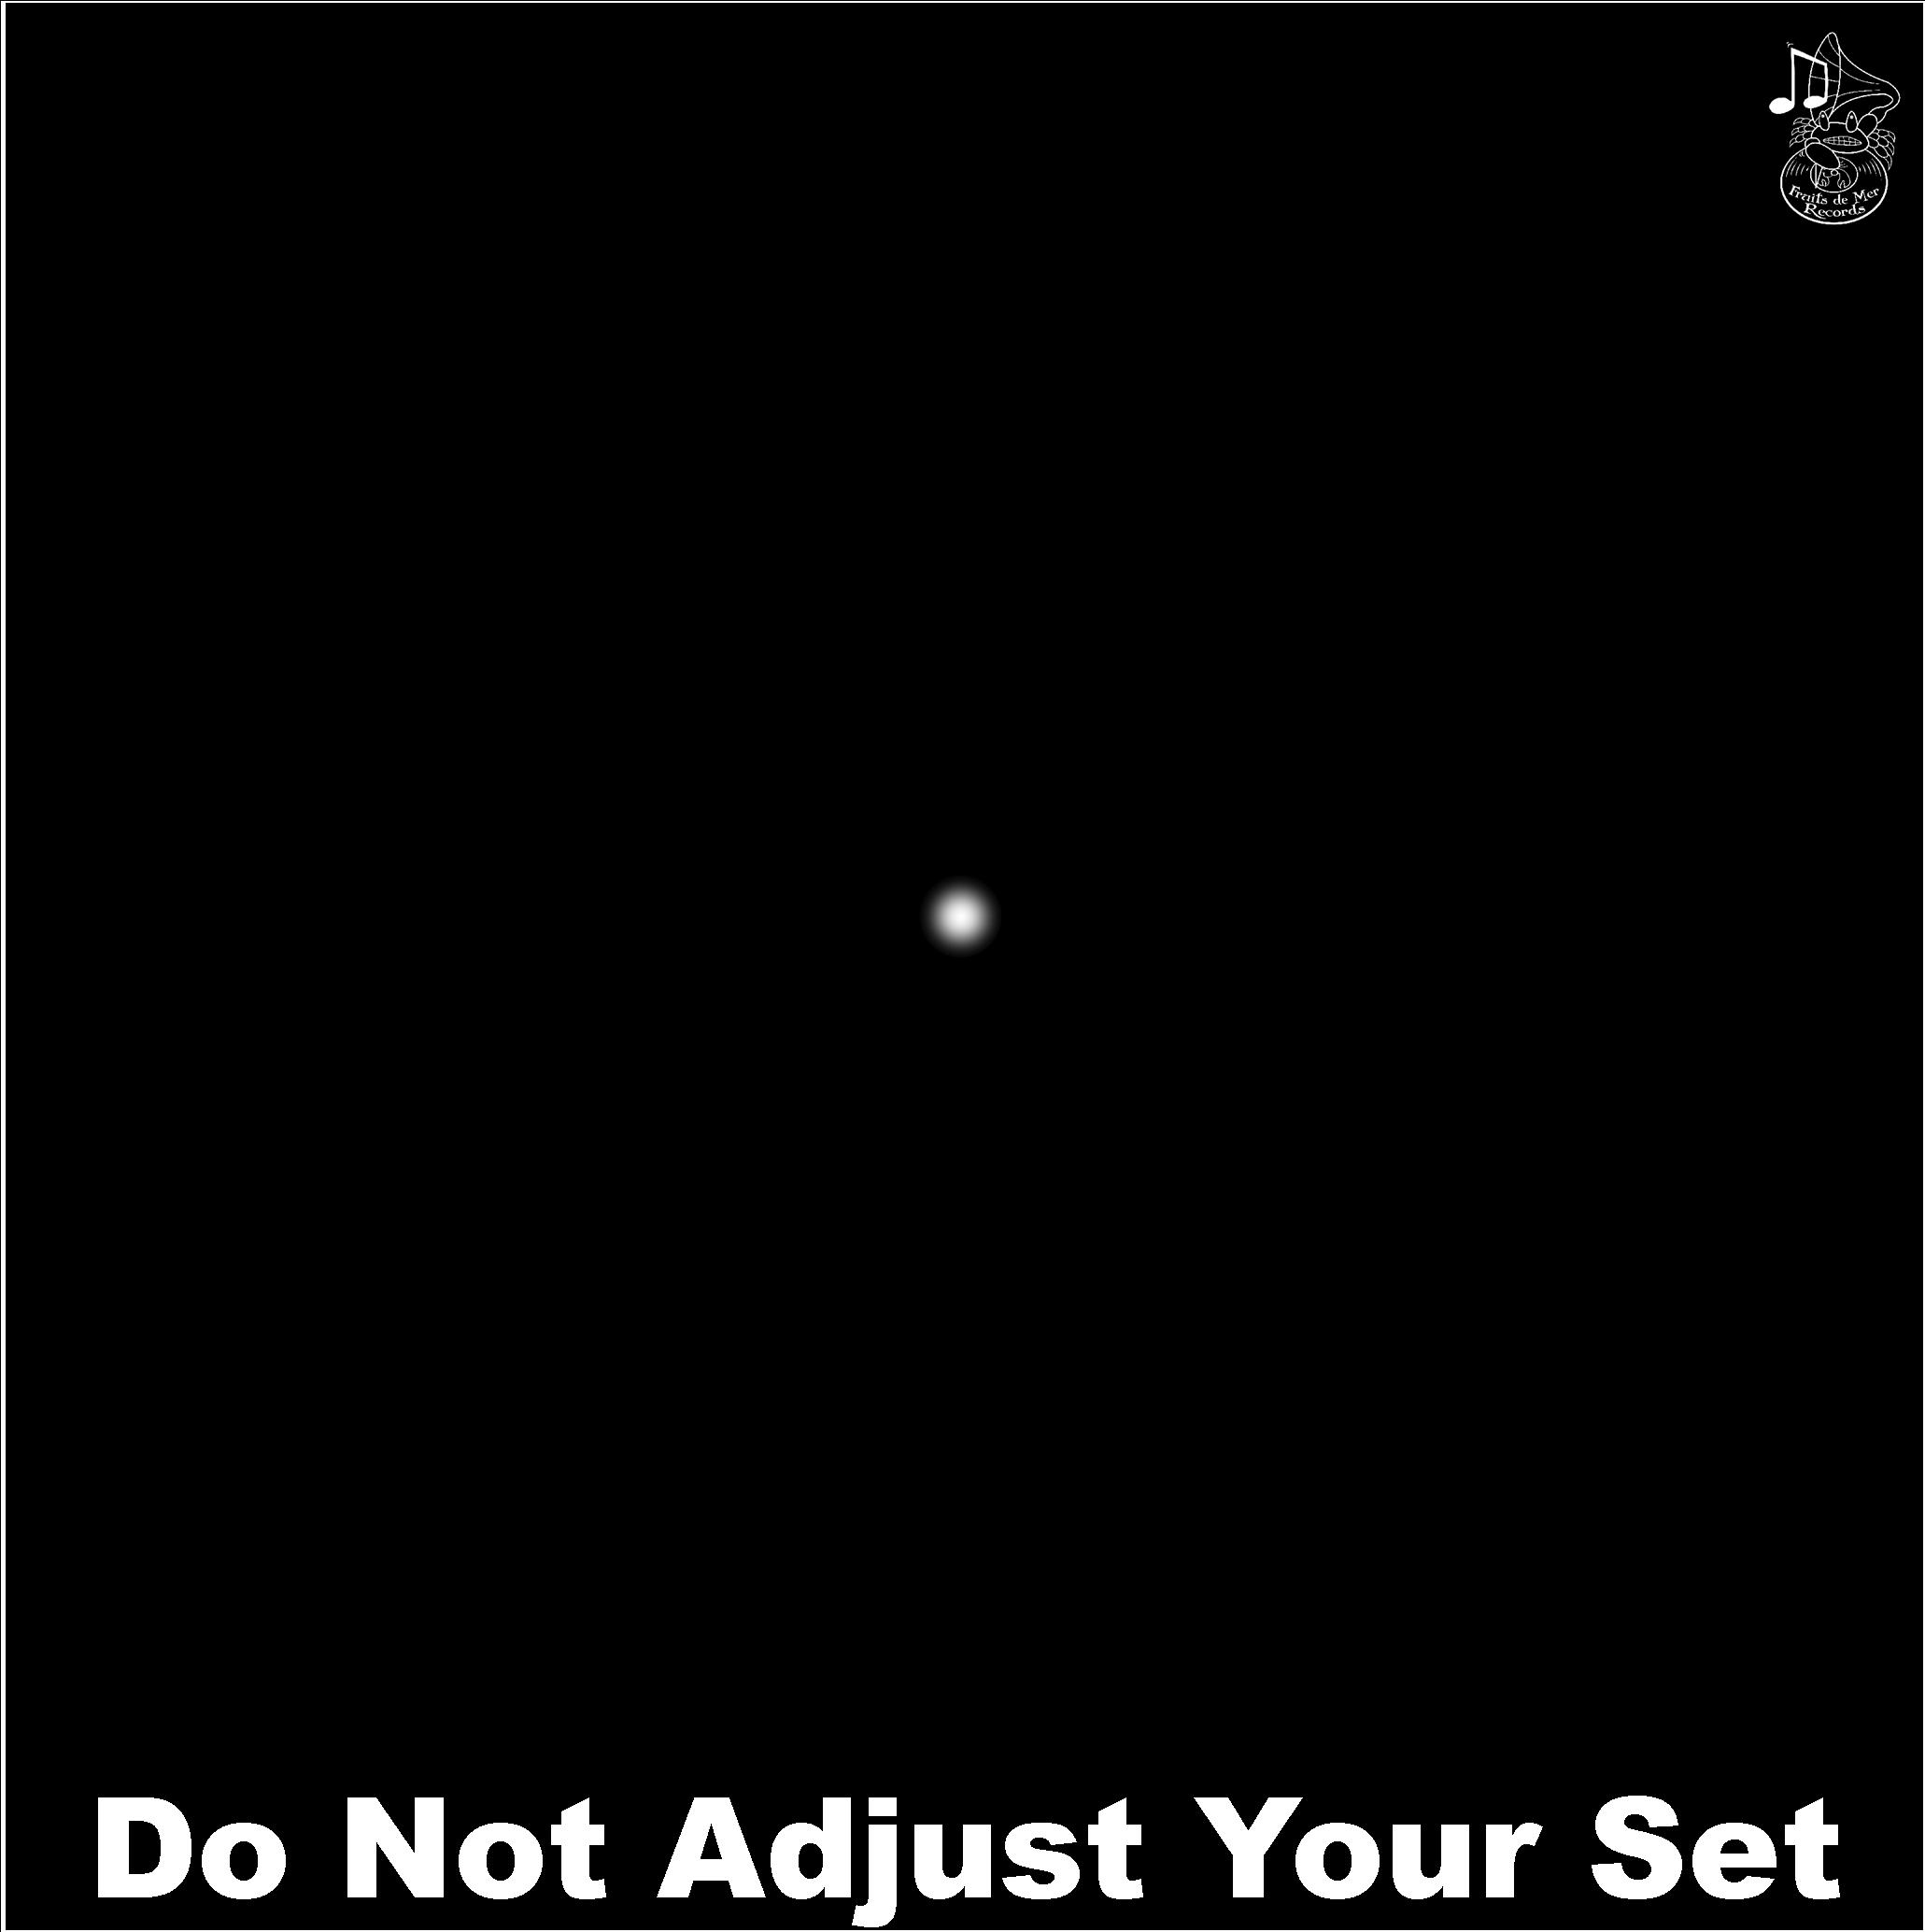 a 'Do Not Adjust Your Set' cover idea that didn't make the cut